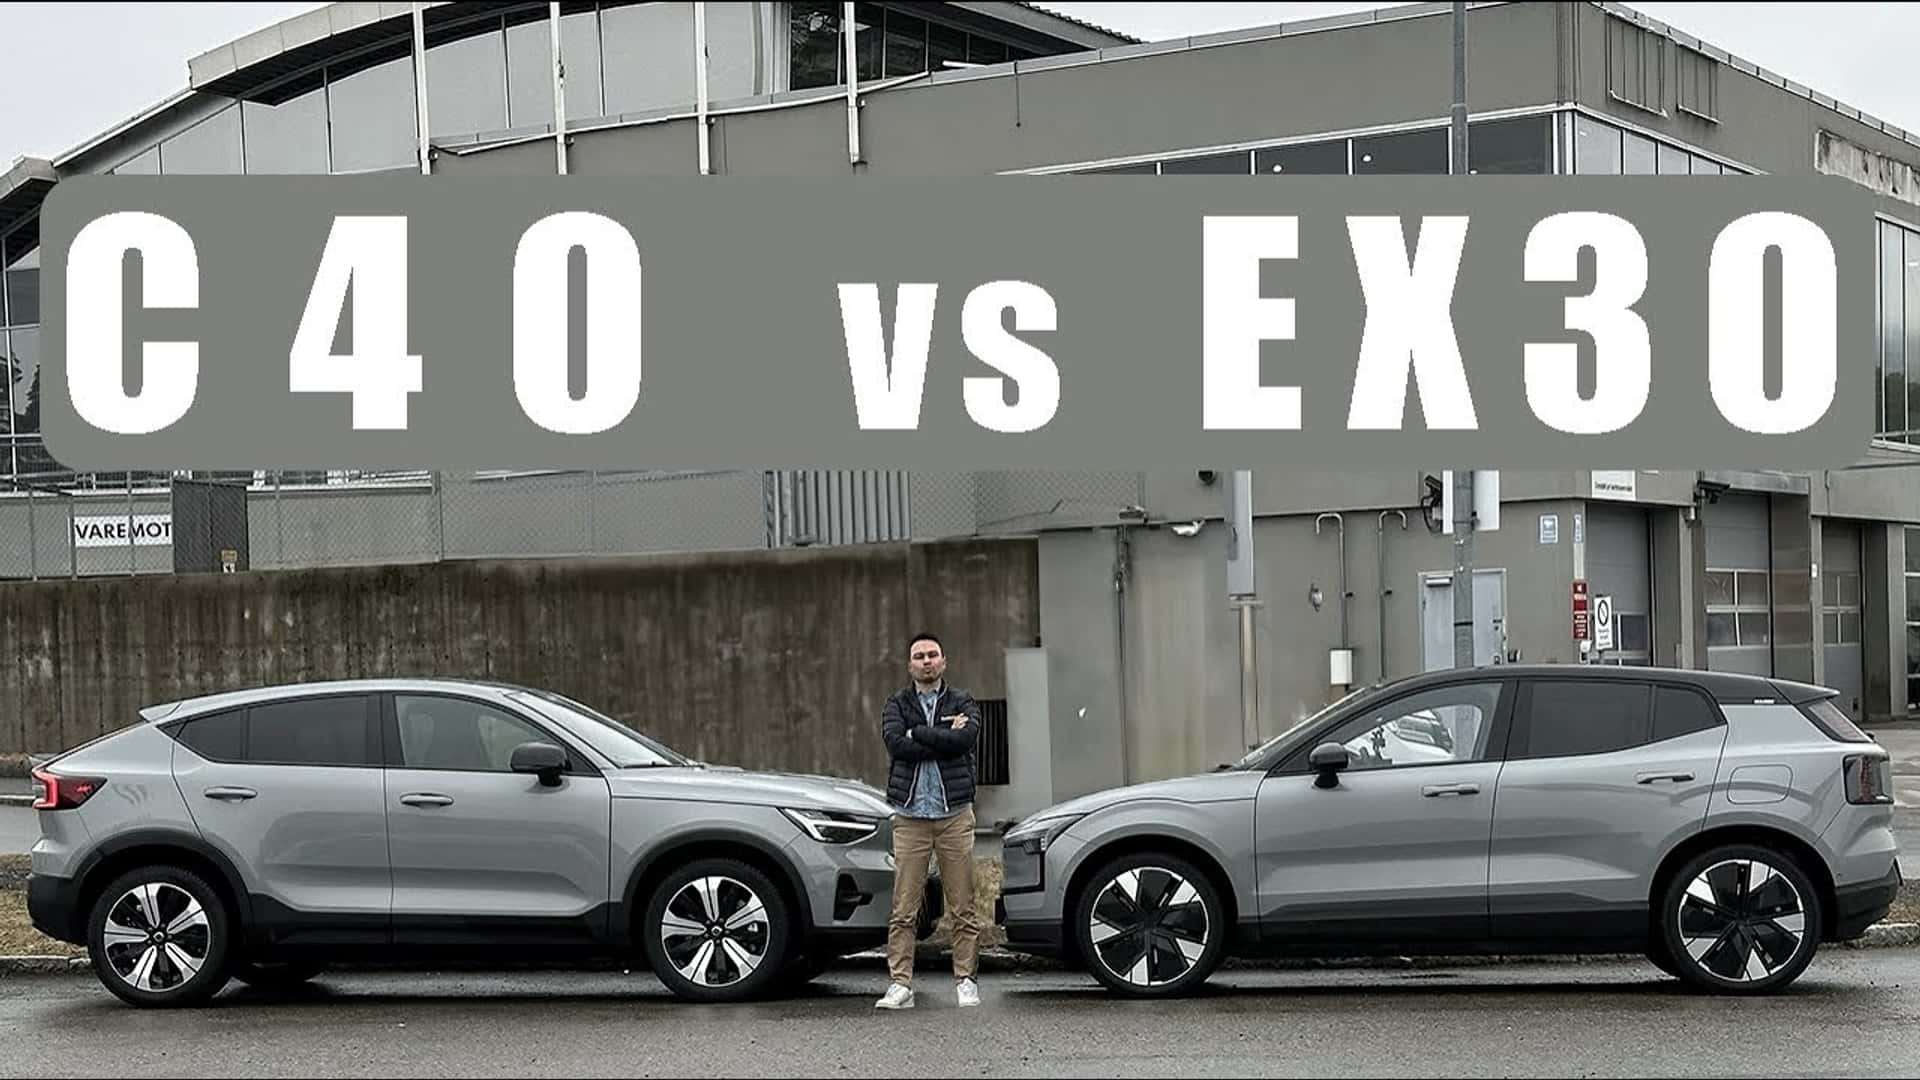 volvo ex30 takes on the volvo c40 in a 380-mile highway race